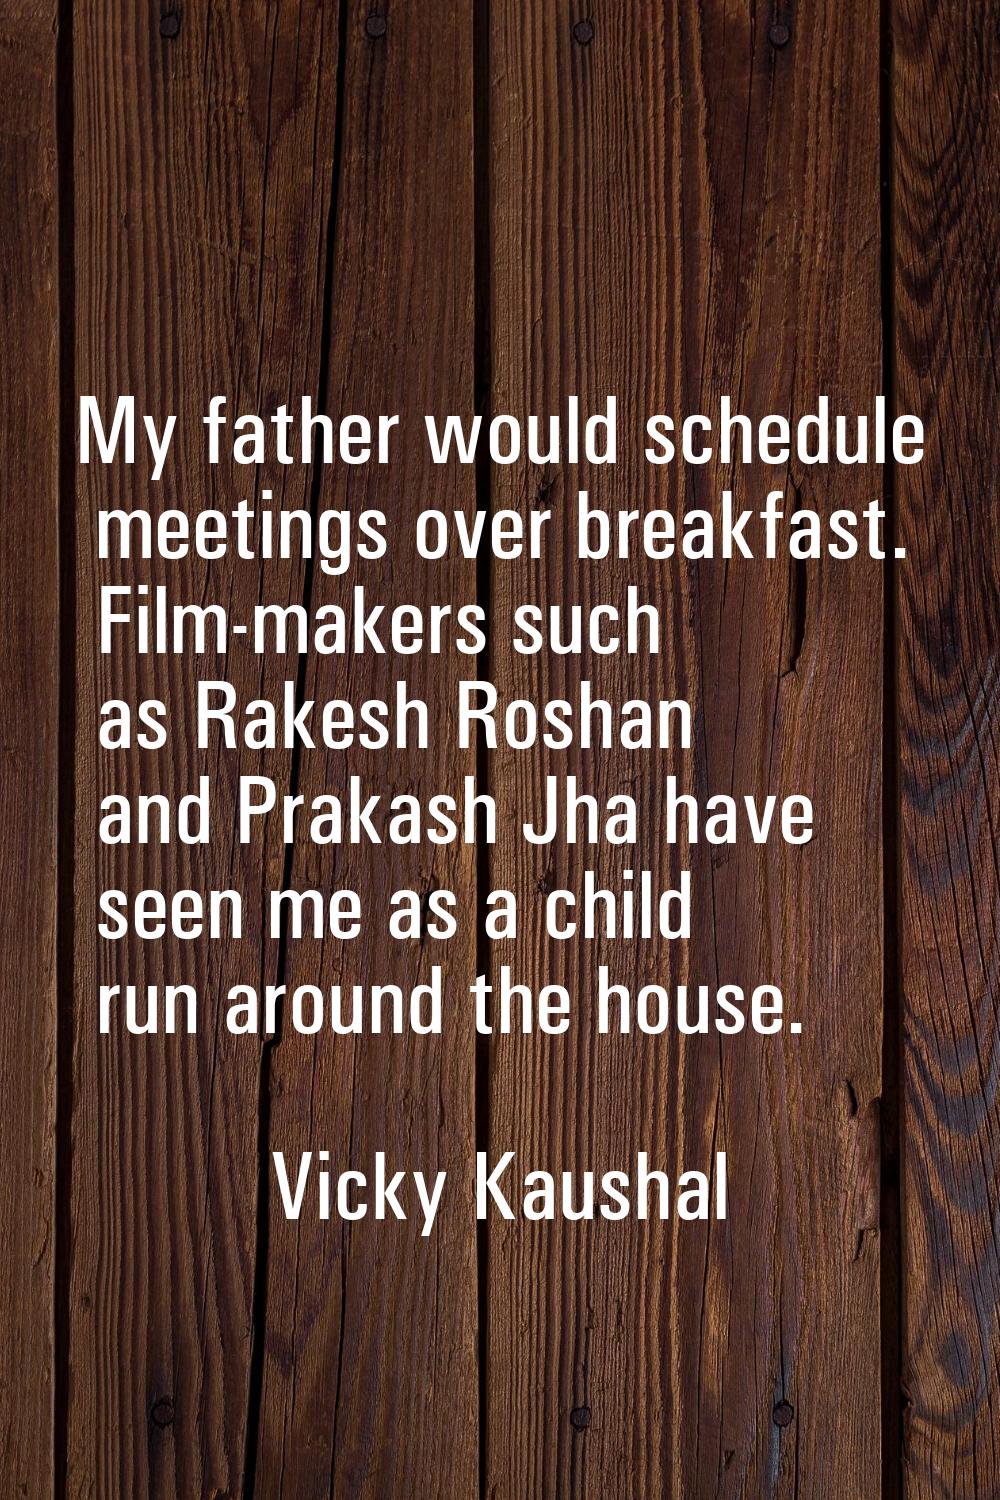 My father would schedule meetings over breakfast. Film-makers such as Rakesh Roshan and Prakash Jha